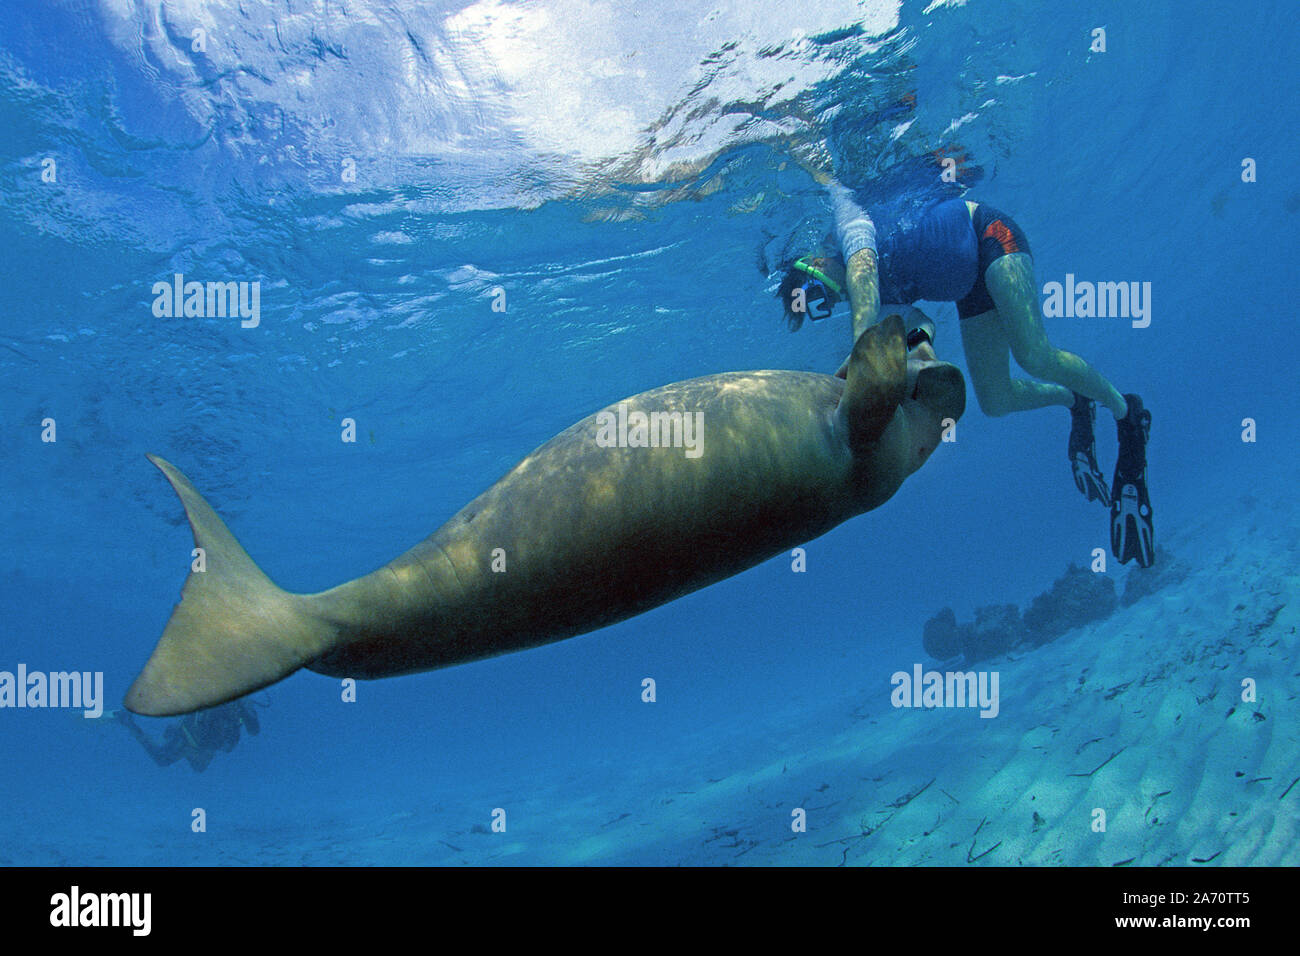 Snorkeller and Dugong (Dugong dugon), playing together, Borneo, Malaysia Stock Photo